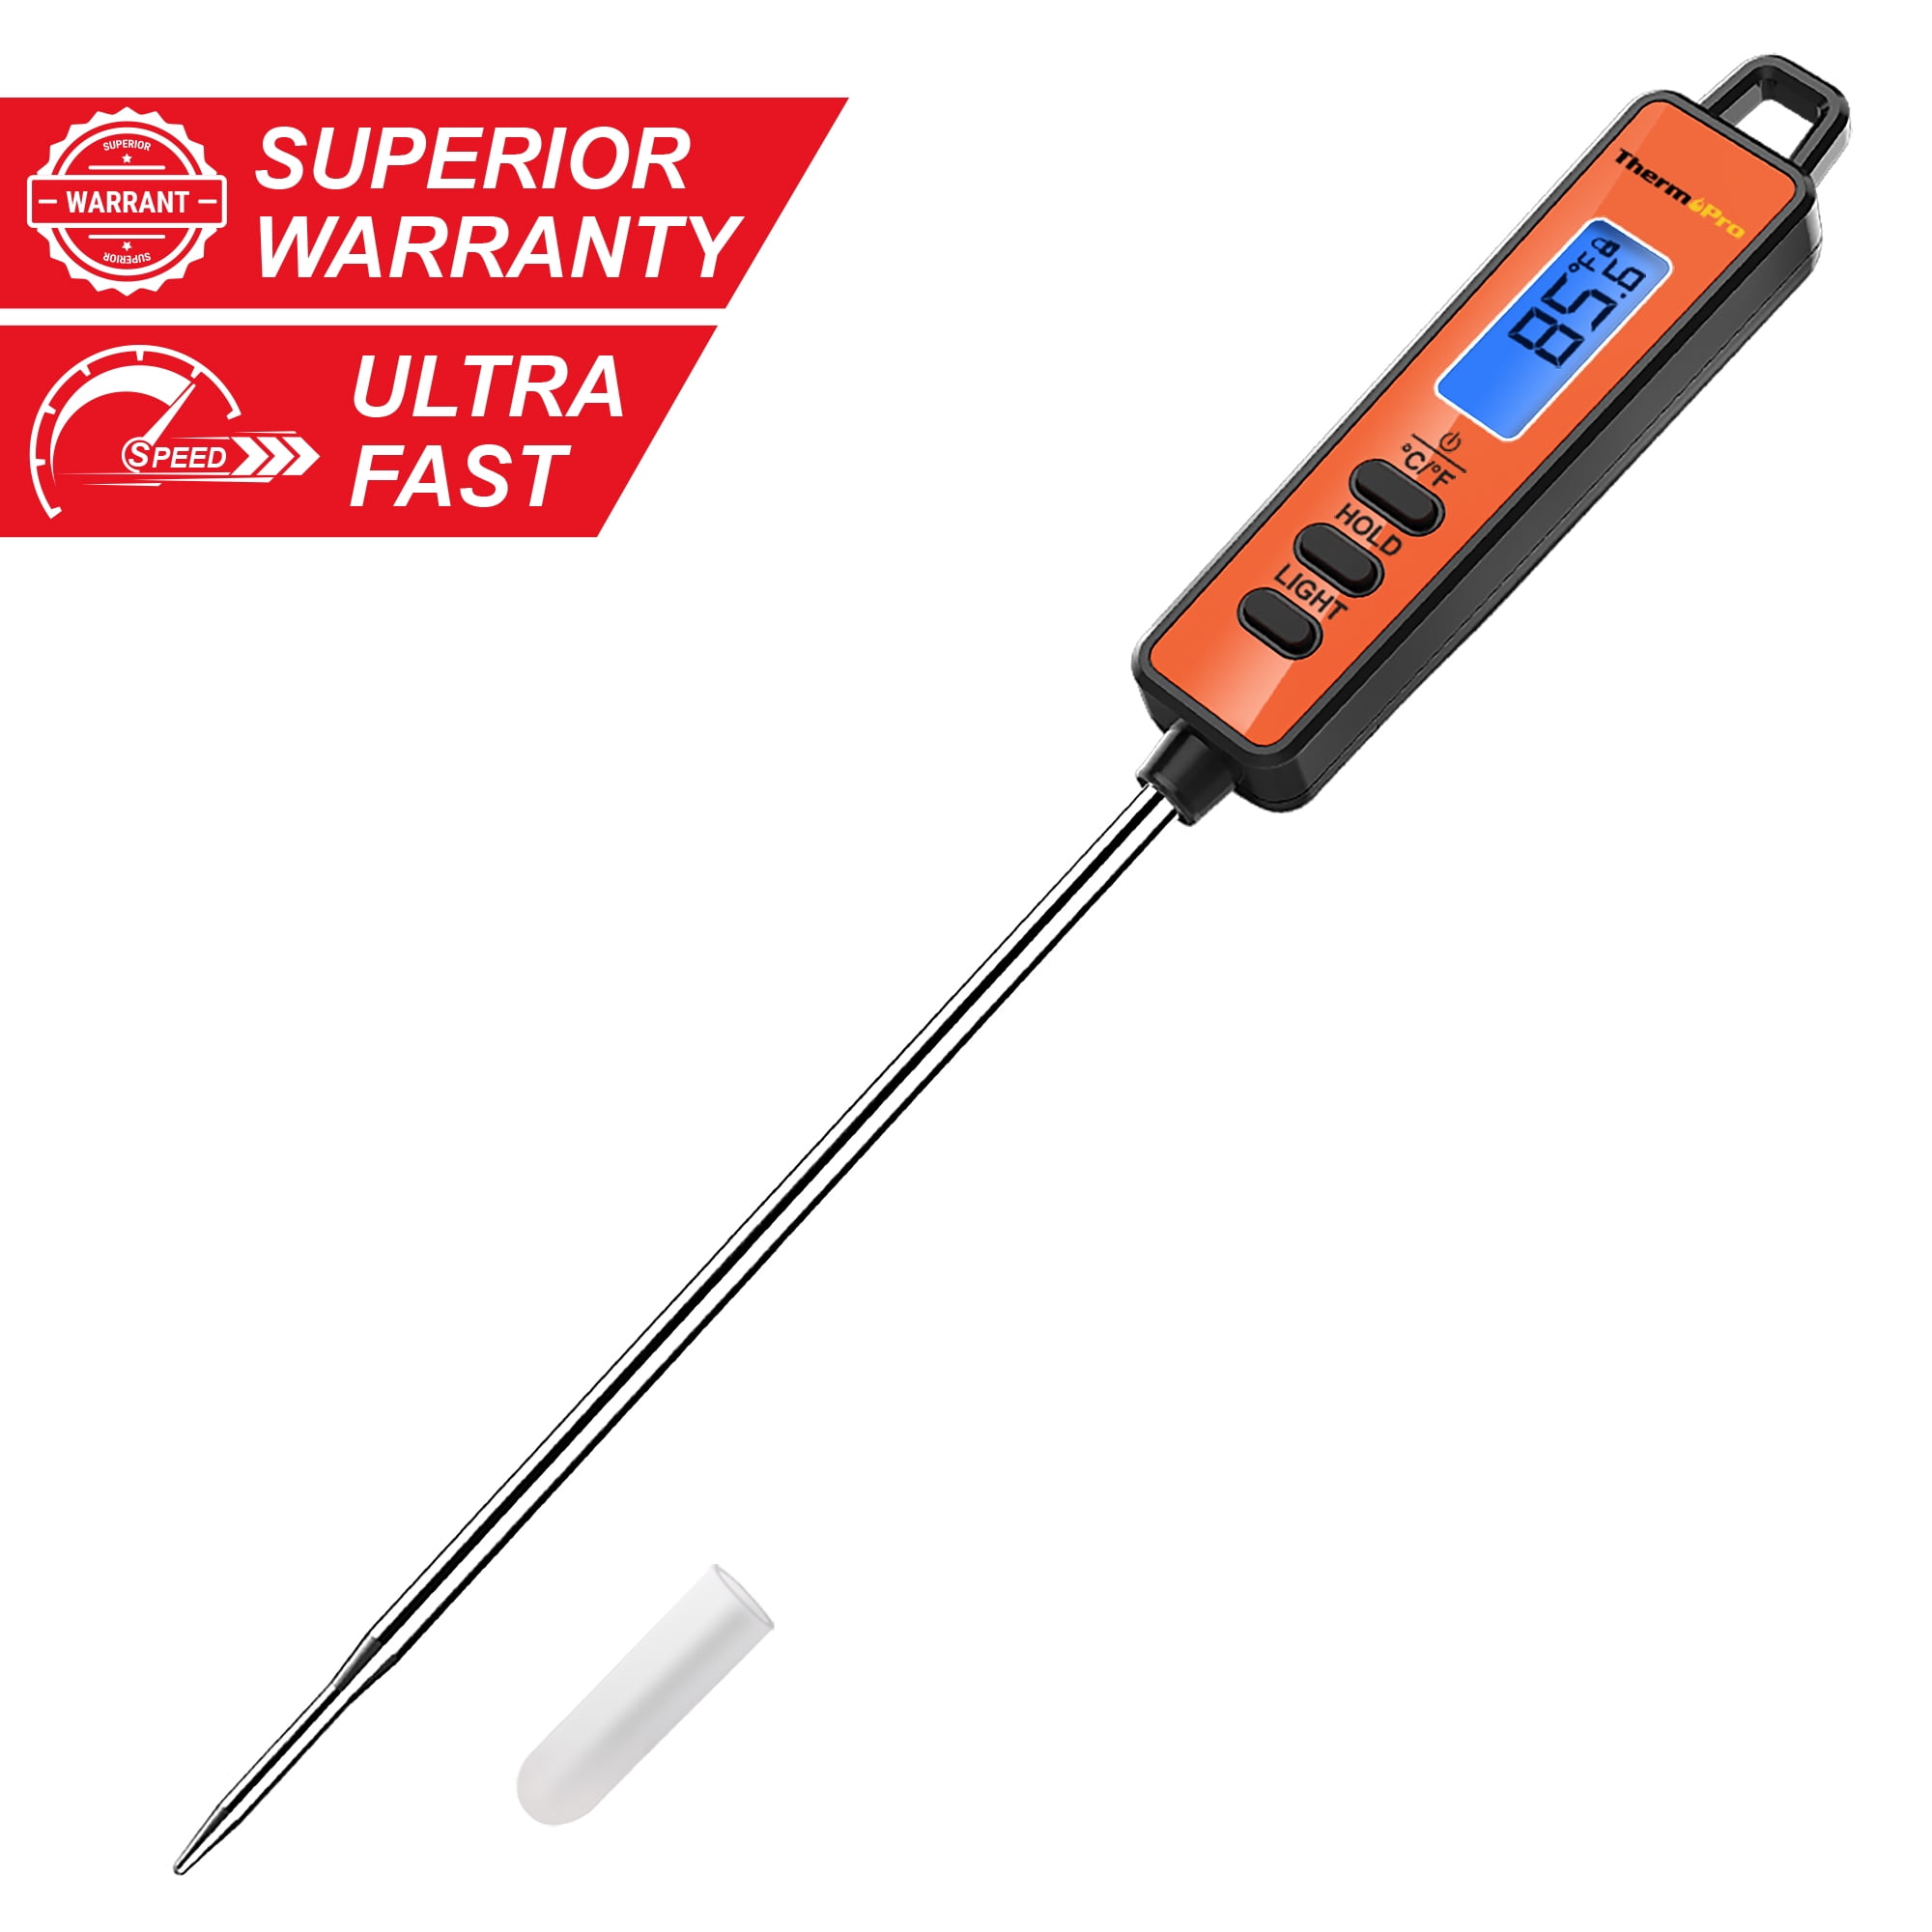 ThermoPro Tp01a Instant Read Digital Meat Thermometer with 5.35 inch Long Probe Thermometer for Grilling BBQ Smoker Grill Oven Thermometer